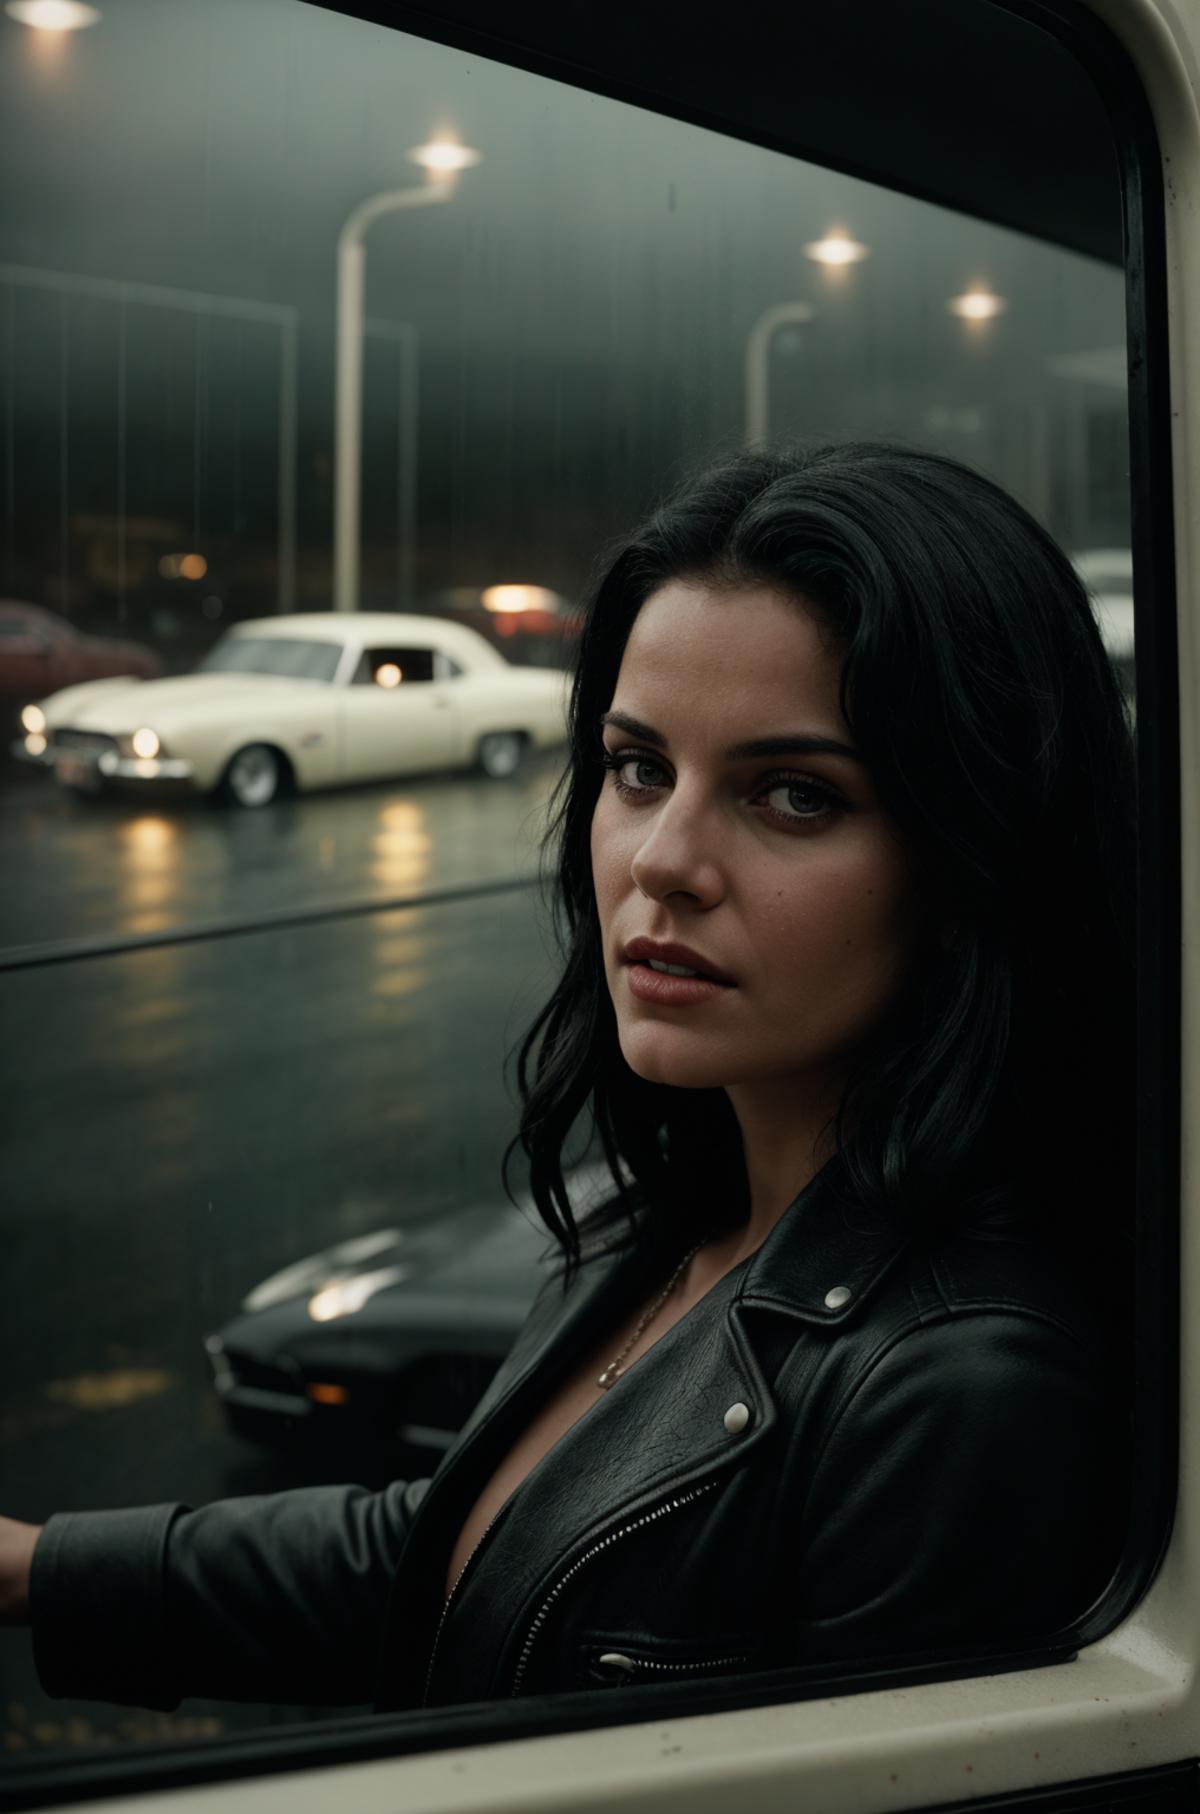 Woman in a black leather jacket looking out the window.